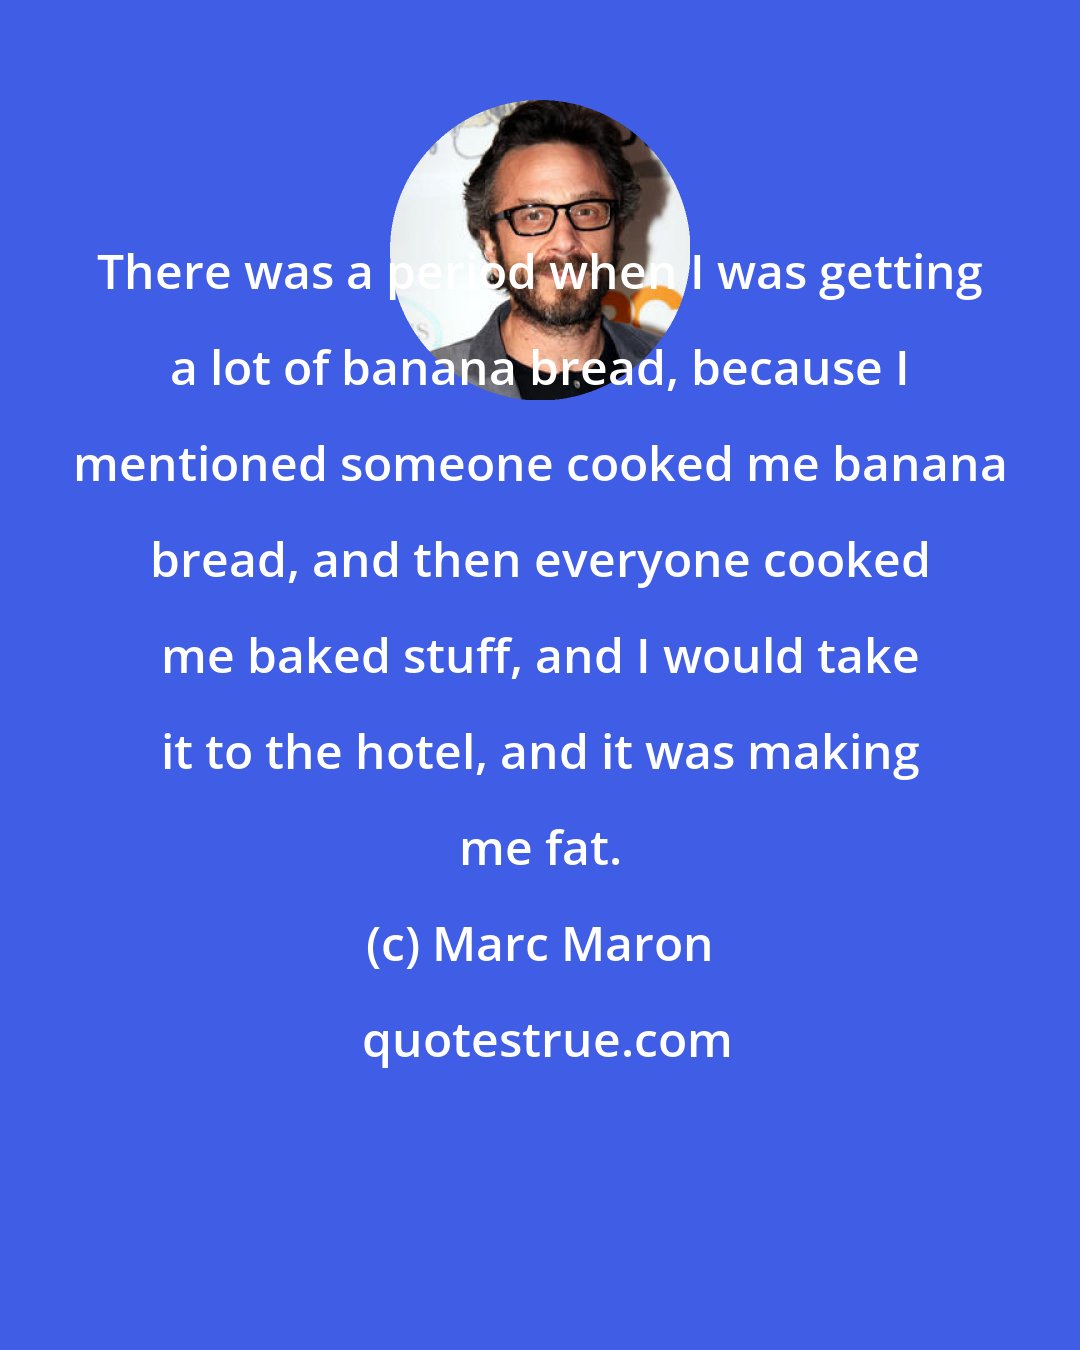 Marc Maron: There was a period when I was getting a lot of banana bread, because I mentioned someone cooked me banana bread, and then everyone cooked me baked stuff, and I would take it to the hotel, and it was making me fat.